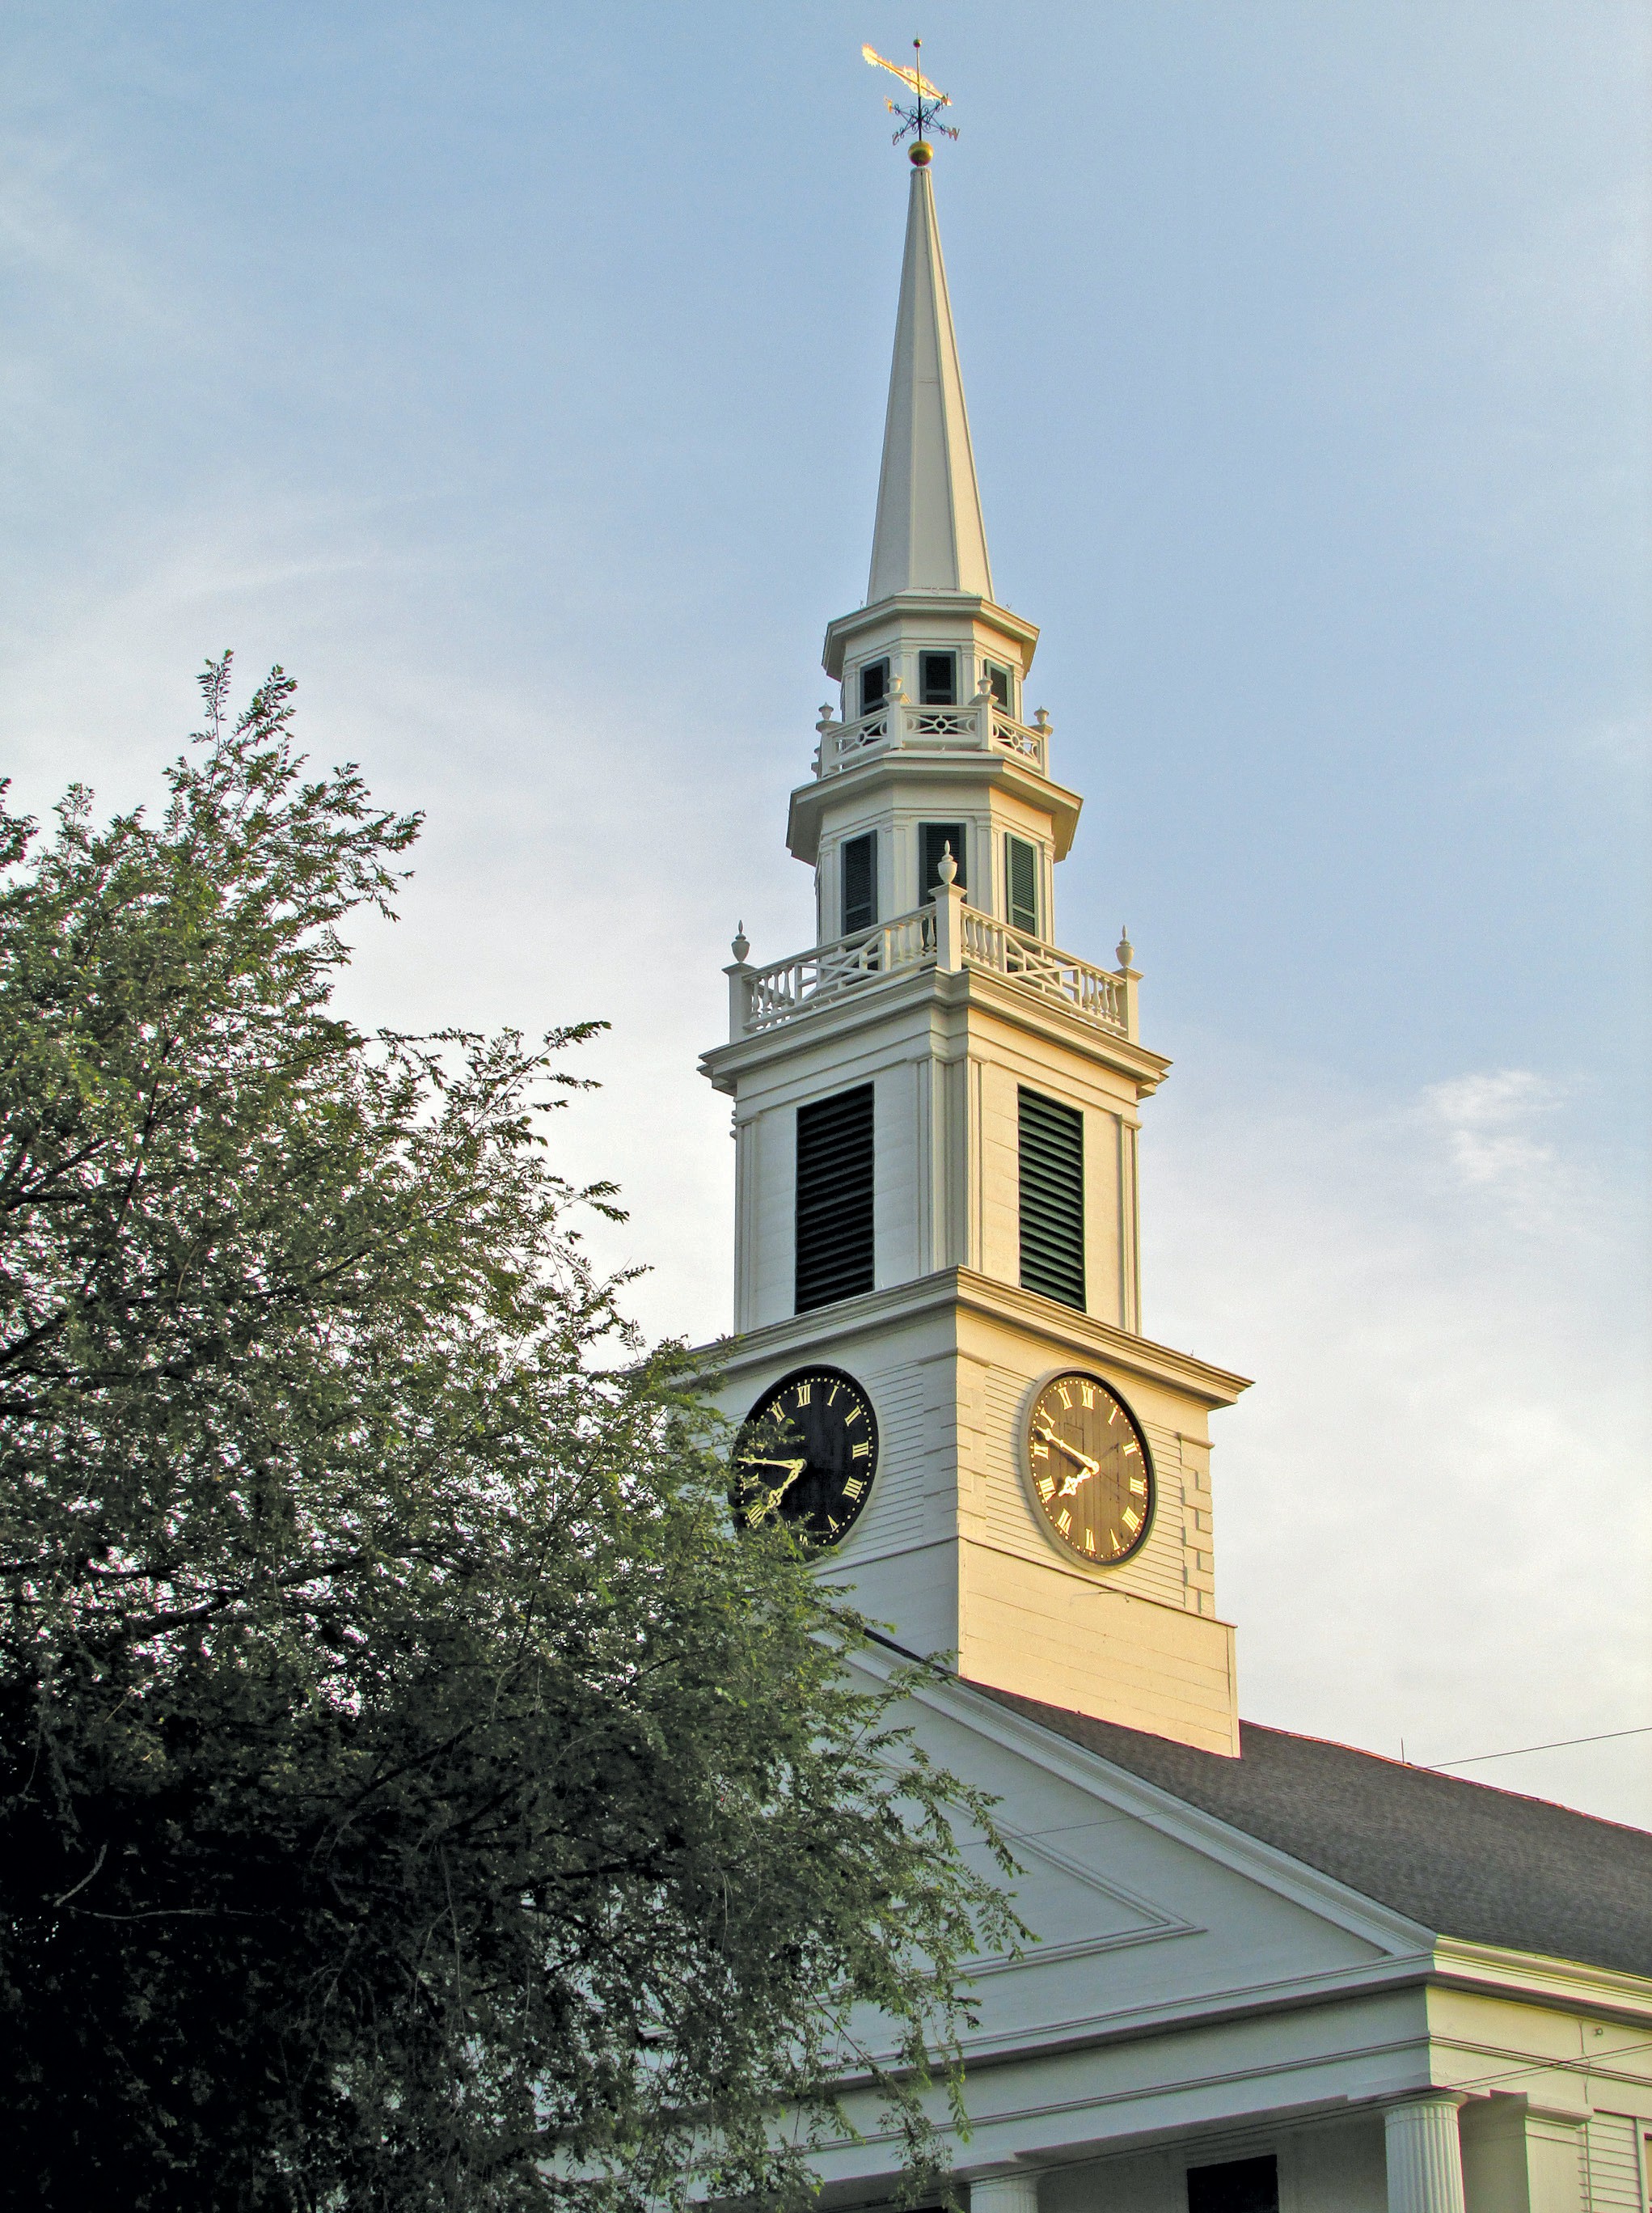 Special permit for cell antennas in church steeple OK'd | The ...